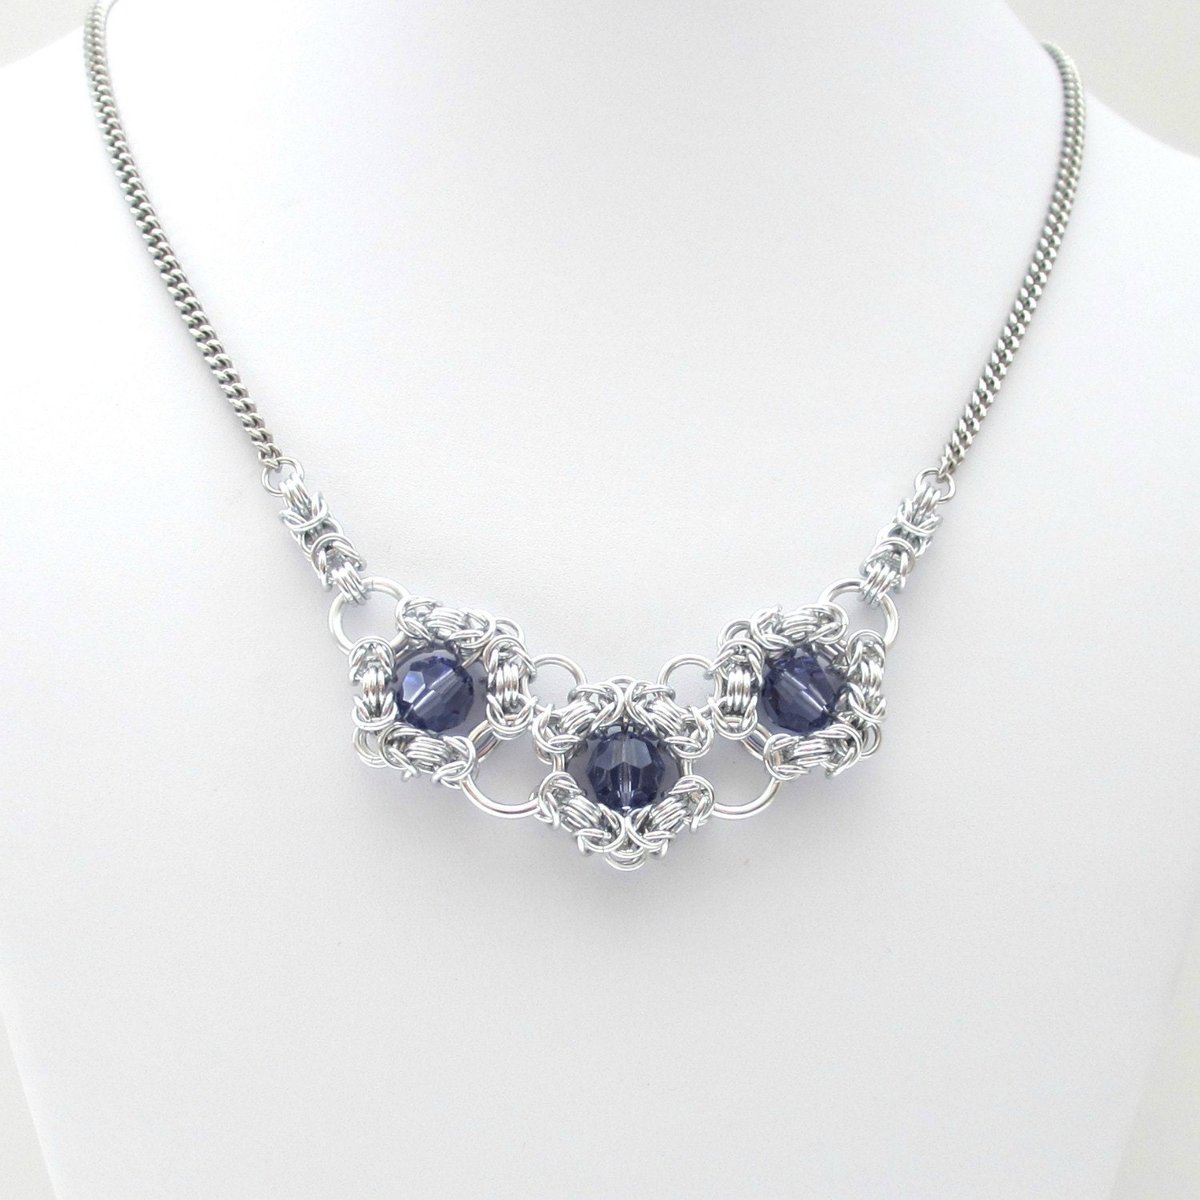 Tanzanite crystal chainmail necklace